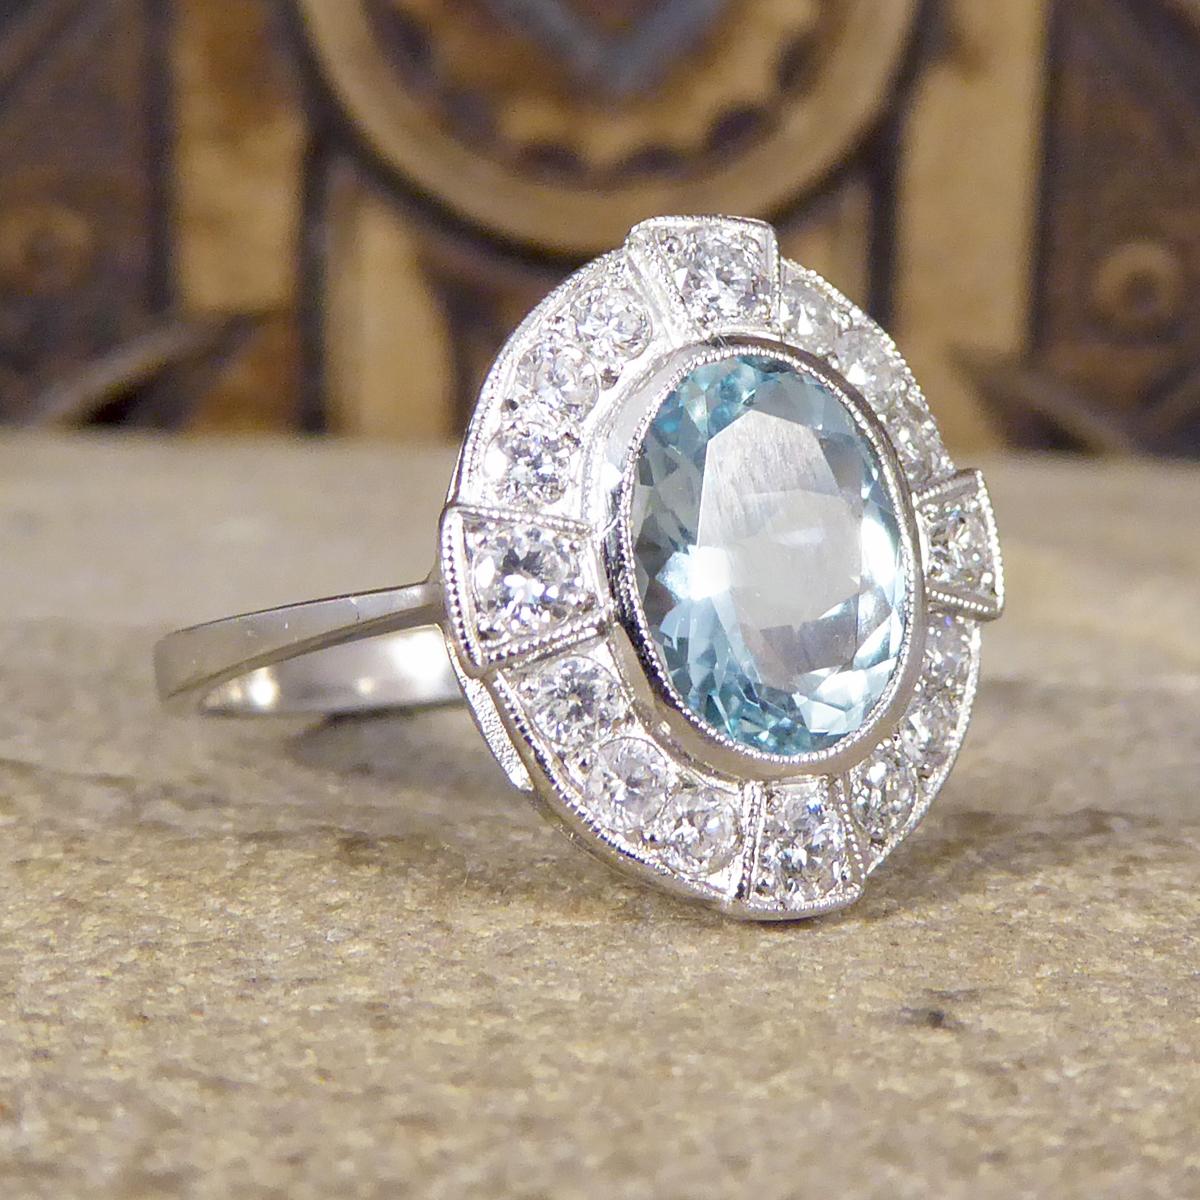 This ring has been crafted to resemble an Art Deco style from Platinum. Featuring a 1.50ct Oval Cut Aquamarine in the centre of the ring in a rub over collar setting with a millegrain edge detail, and Diamonds circling the Aqua graduating in size.